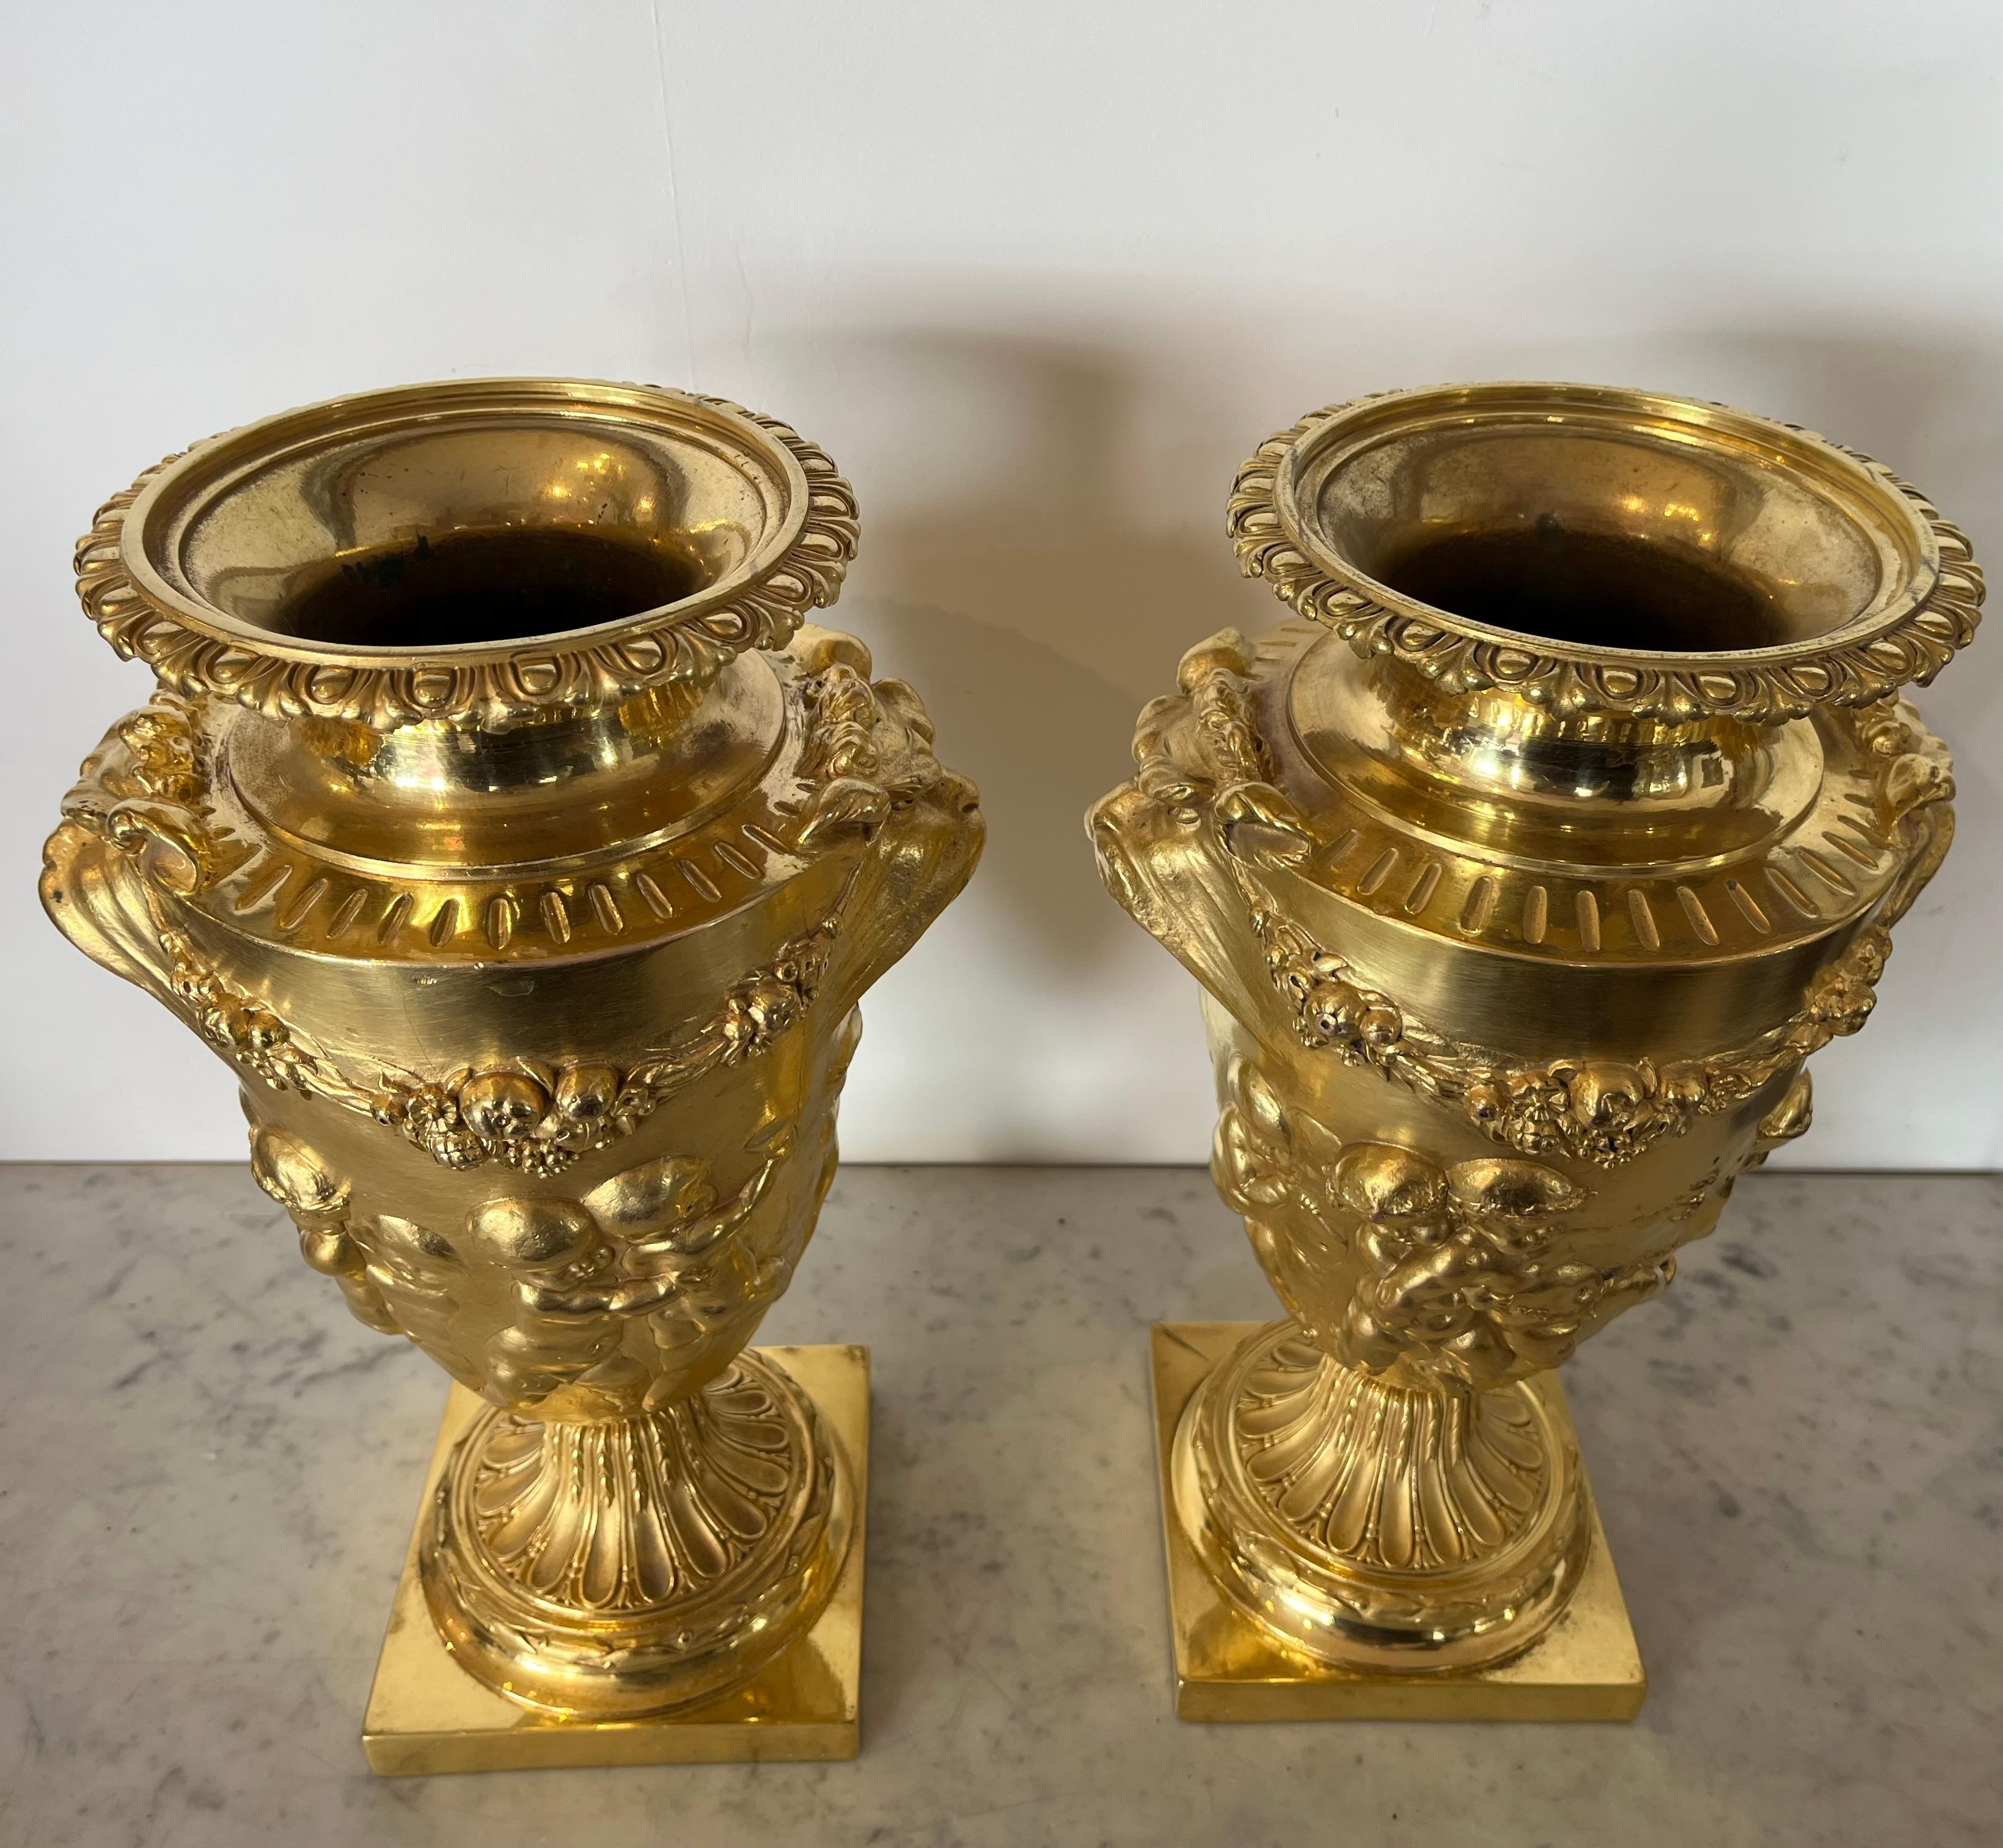 Napoleon III Pair Of Urns / Cassolettes - Gilt Bronze - (after Clodion) - France - 19th Centu For Sale